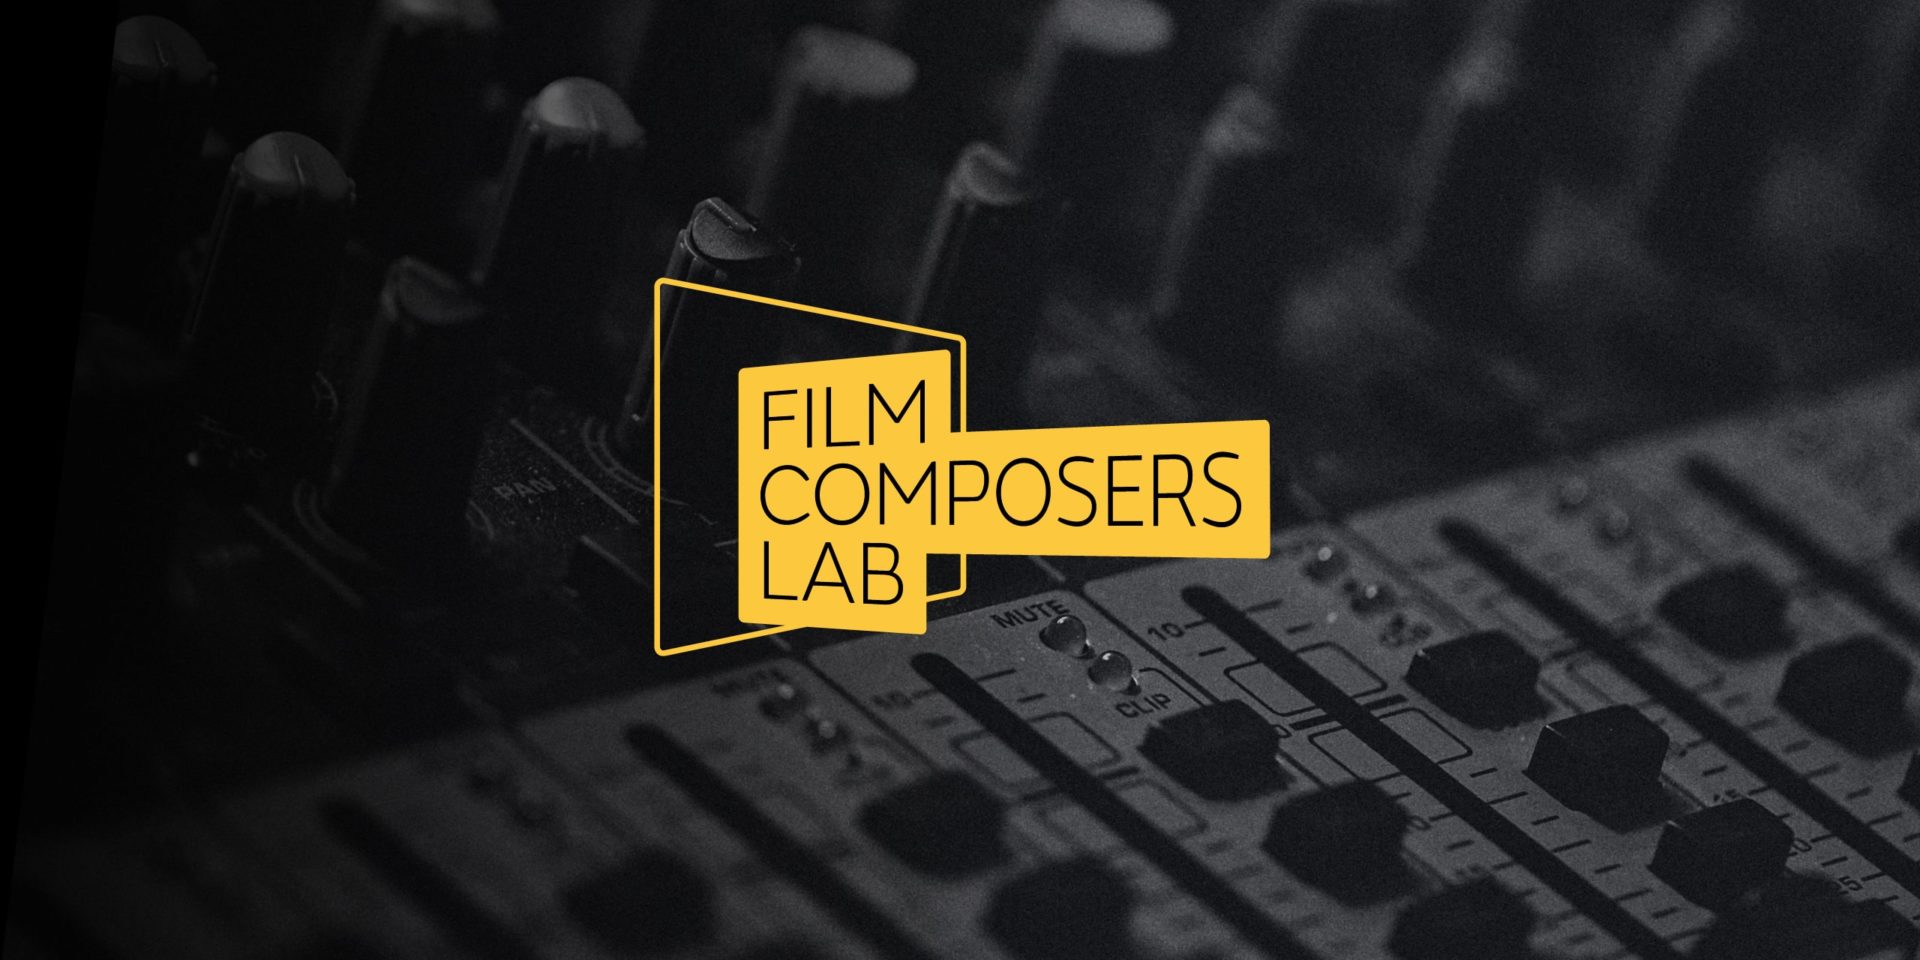 New joint initiative supports early-career film composers